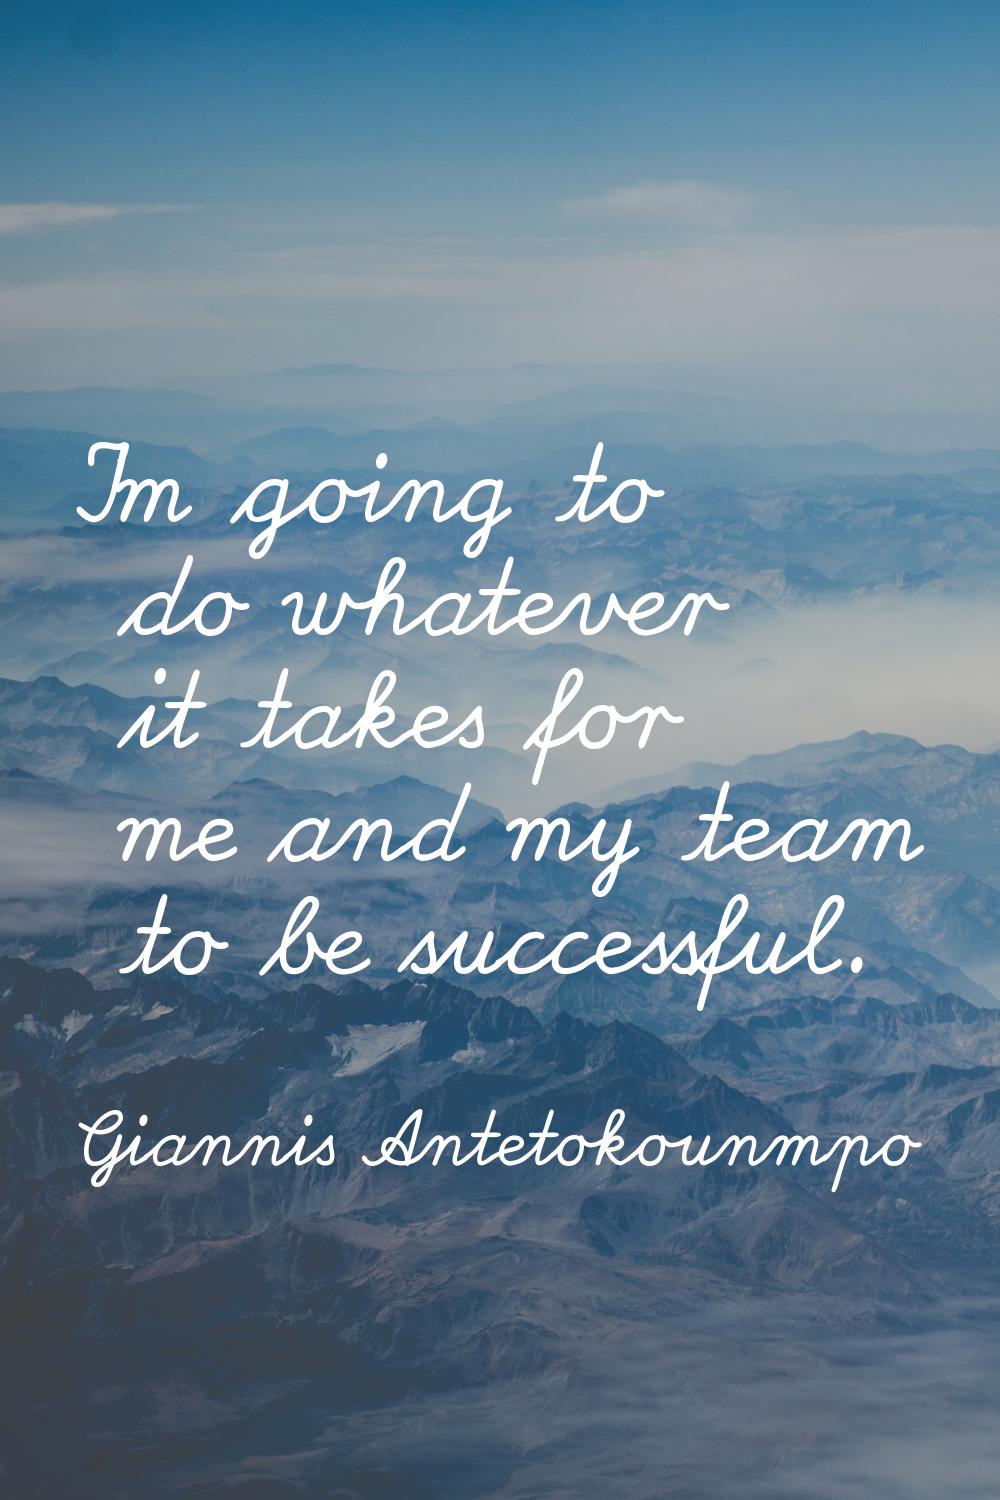 I'm going to do whatever it takes for me and my team to be successful.